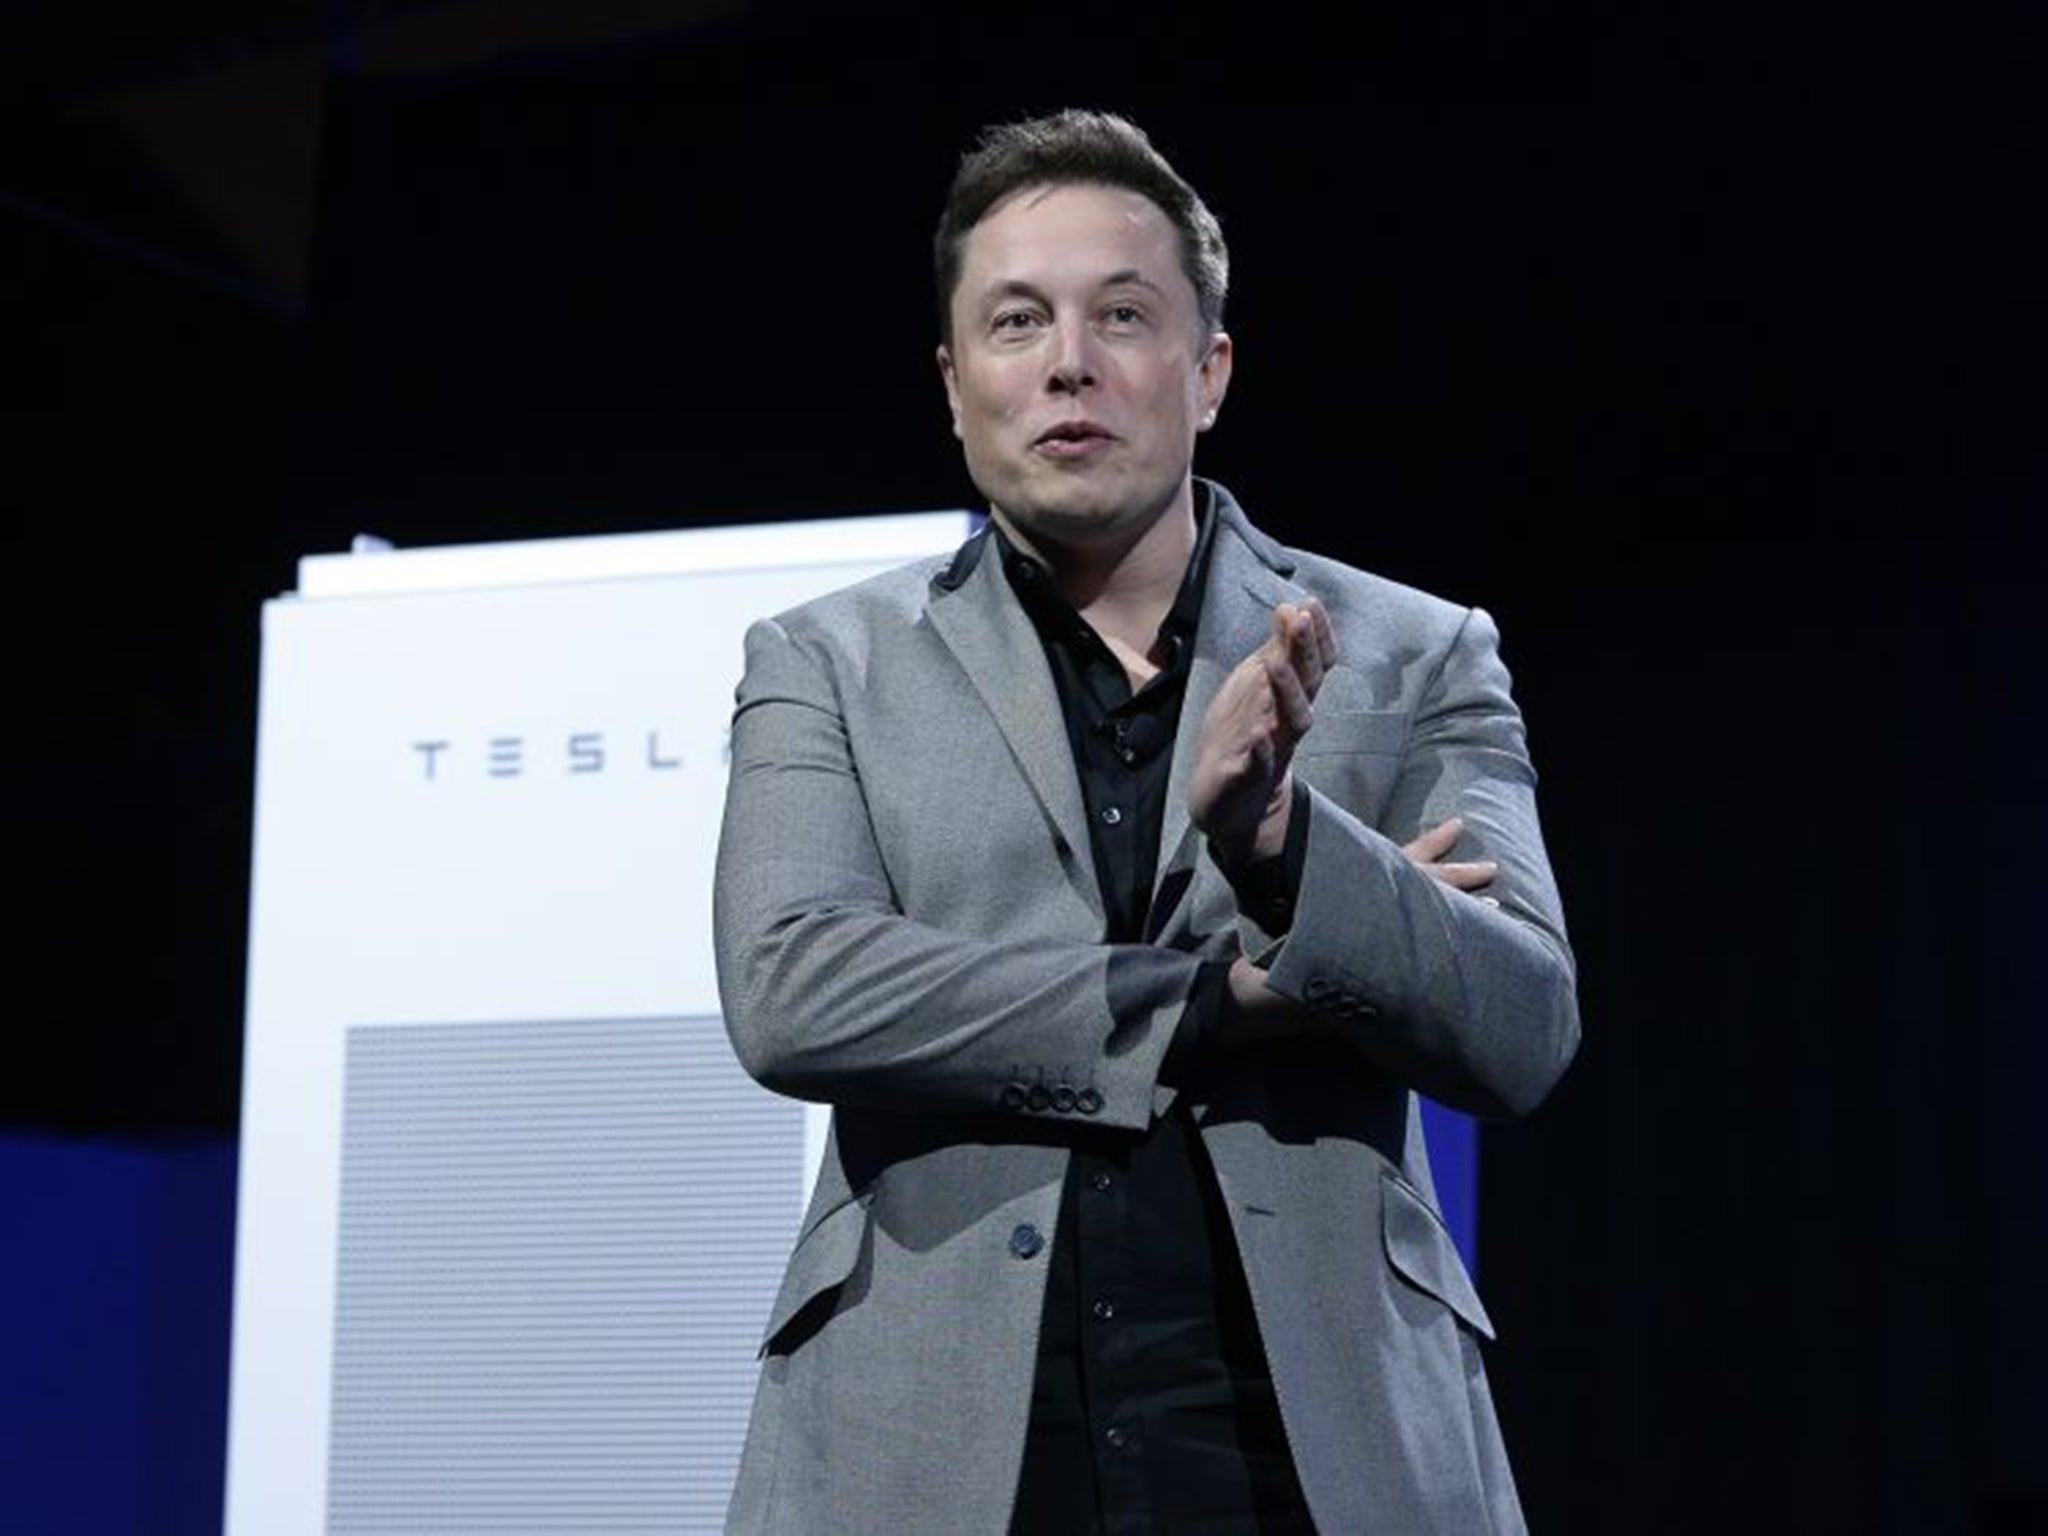 Elon Musk is the CEO of Solar City, SpaceX and Tesla